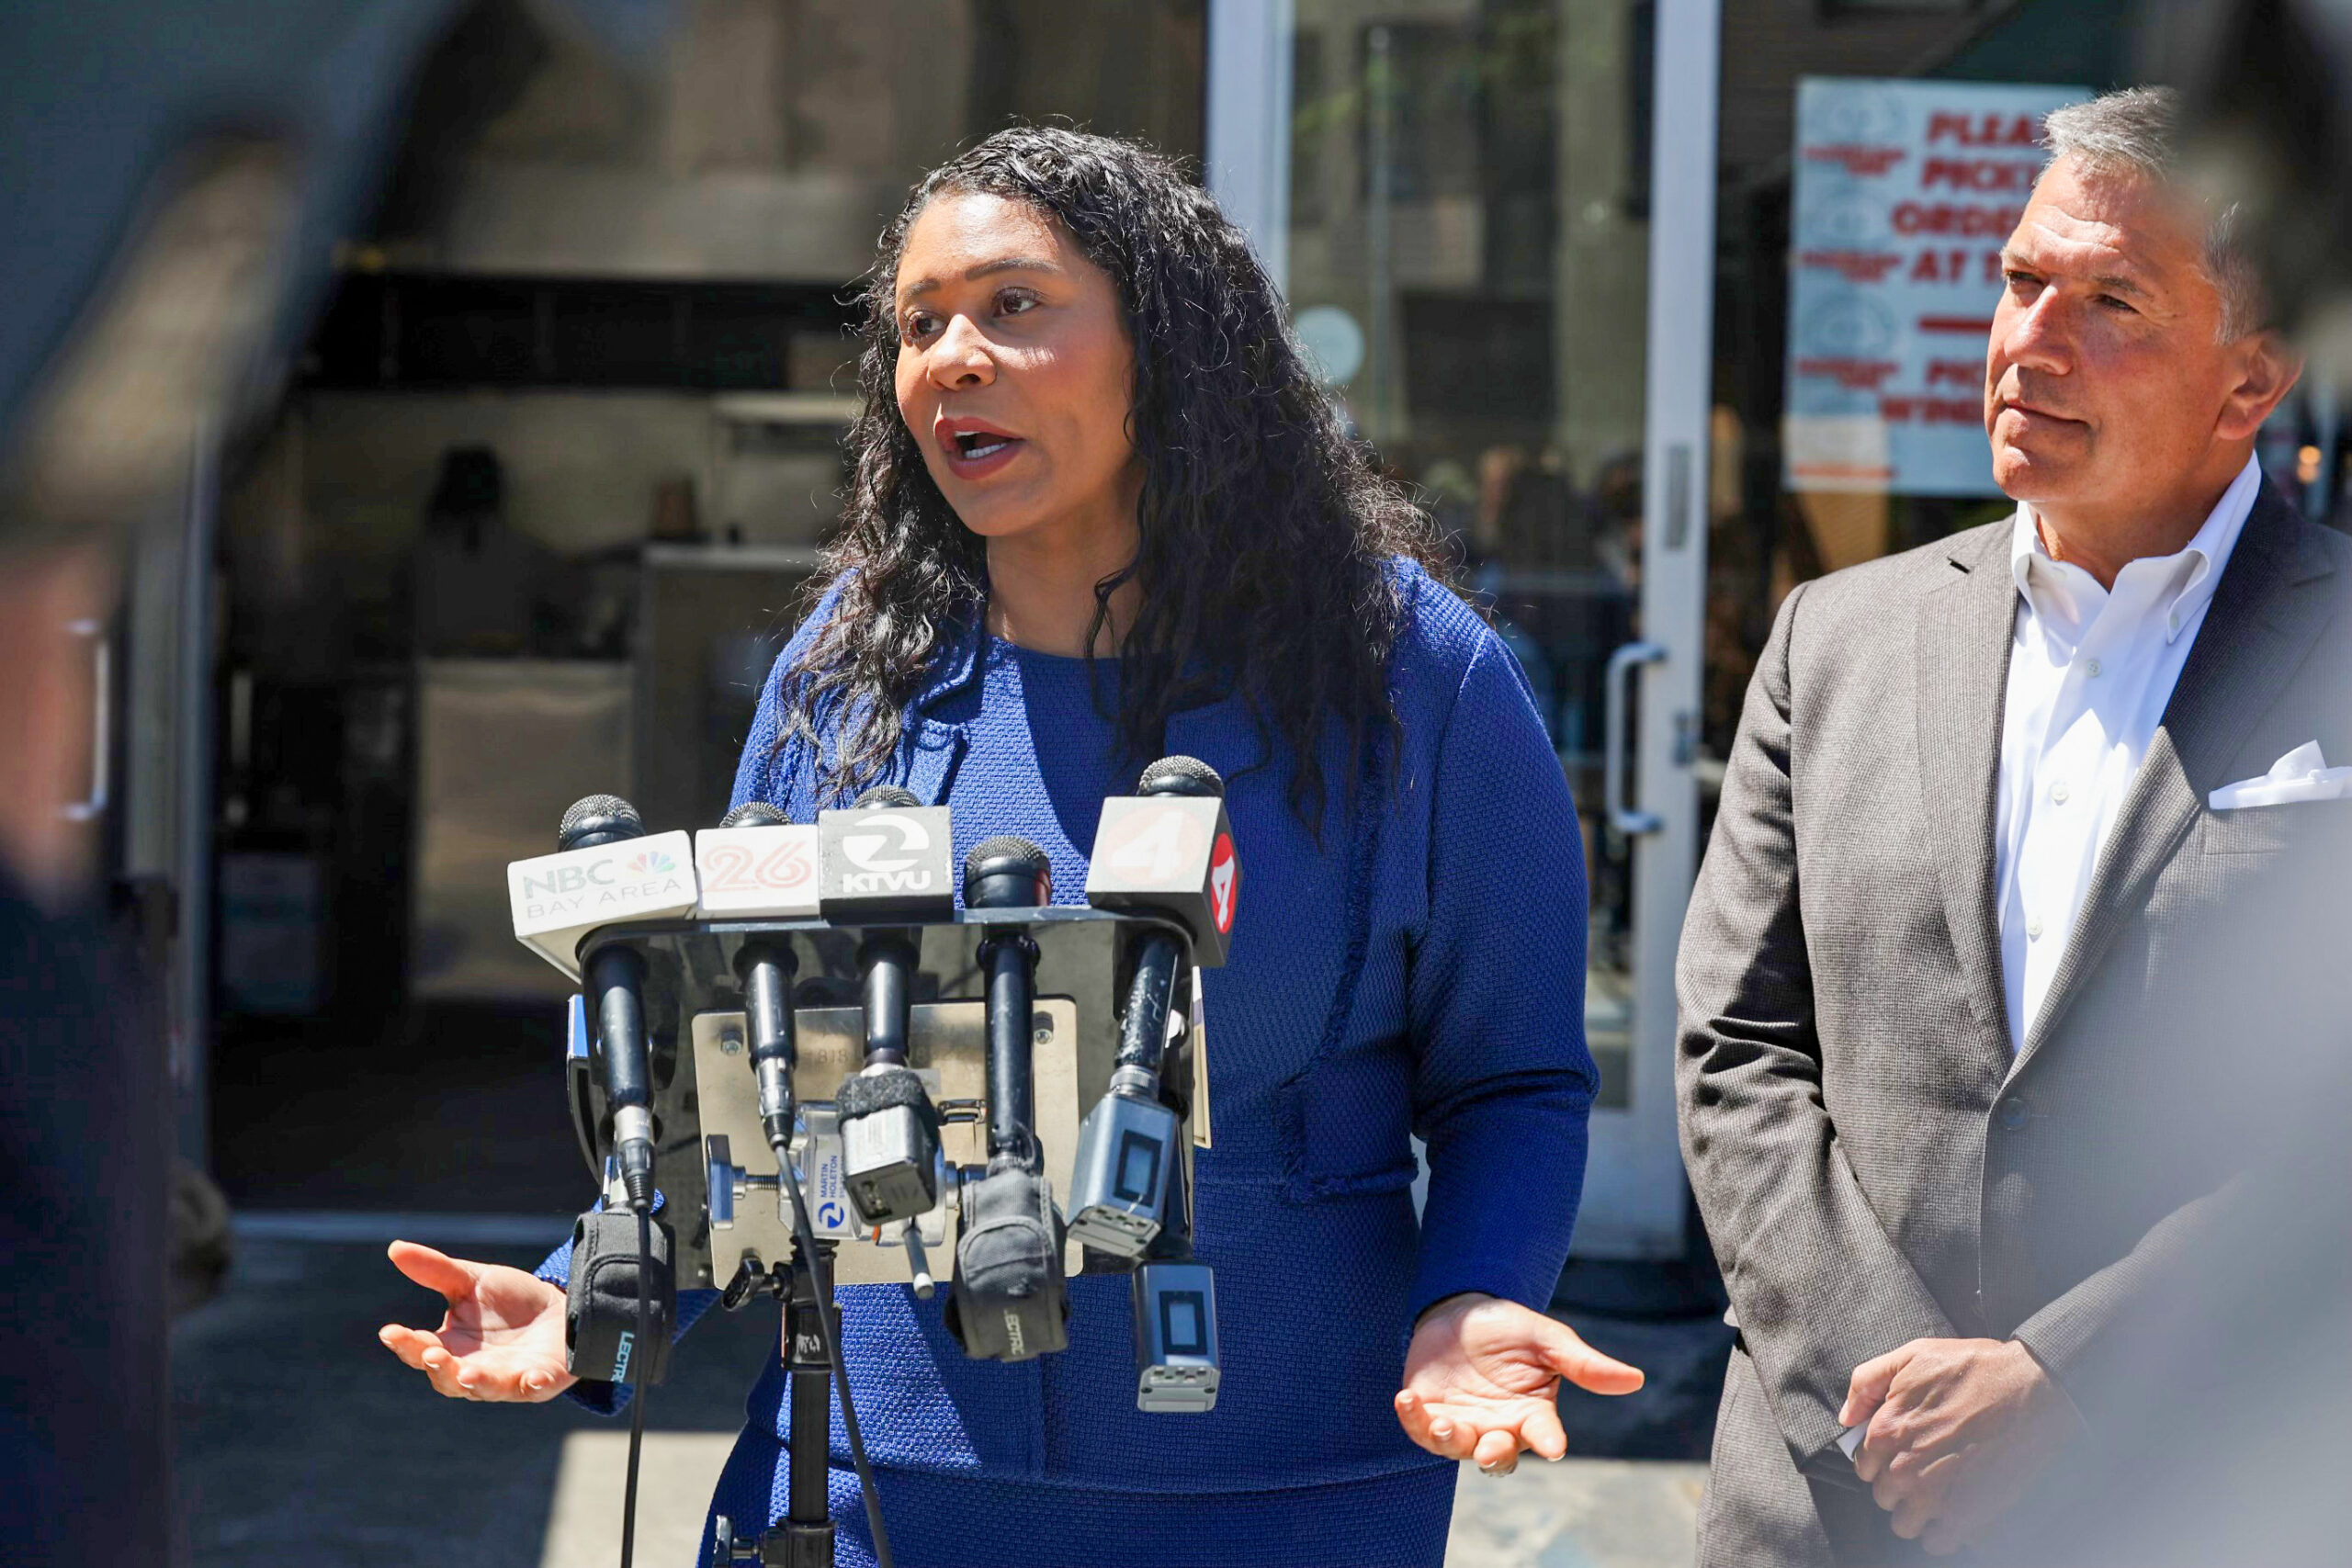 Mayor Breed Weighs In on DA Recall: ‘This Does Not Mean That Criminal Justice Reform in San Francisco is Going Anywhere’